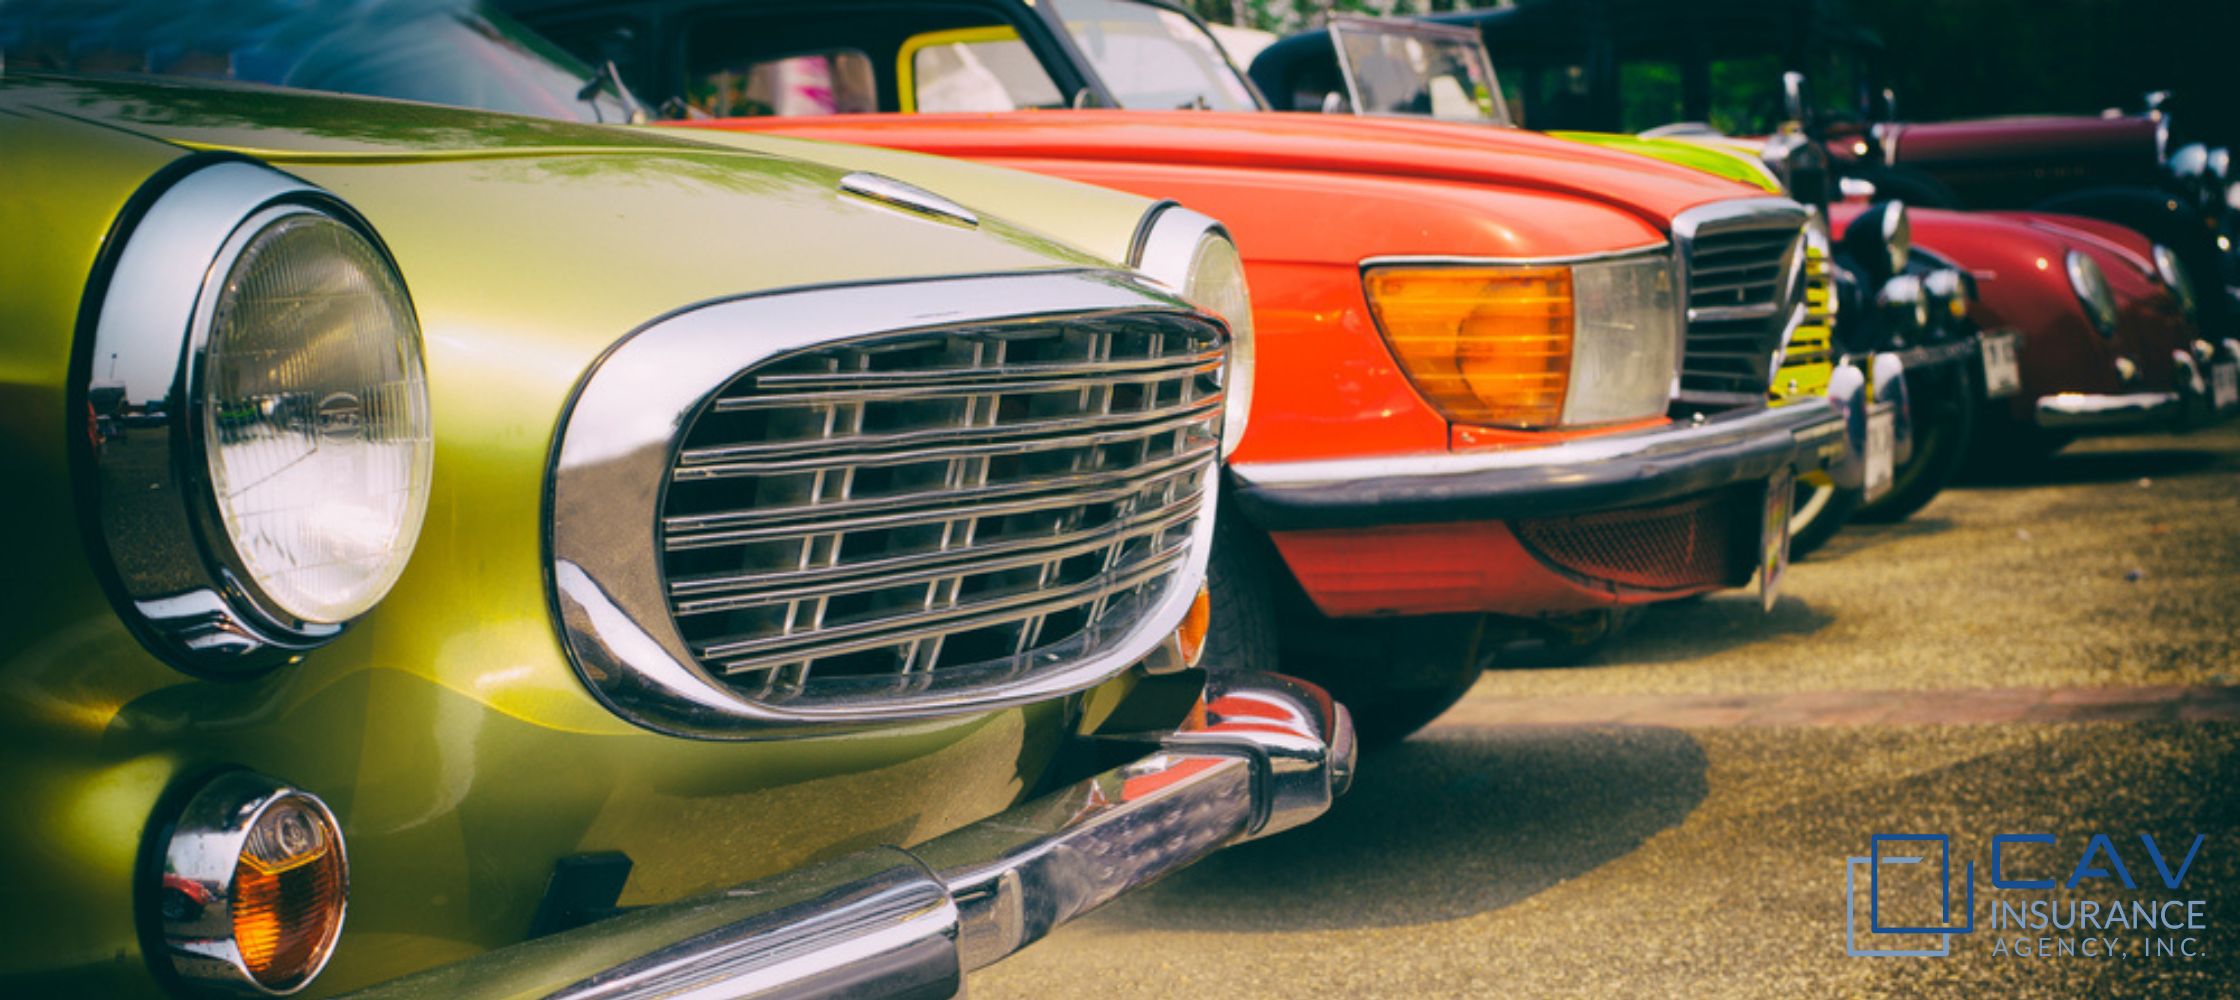 How to Find the Right Insurance for Your Antique Vehicle?